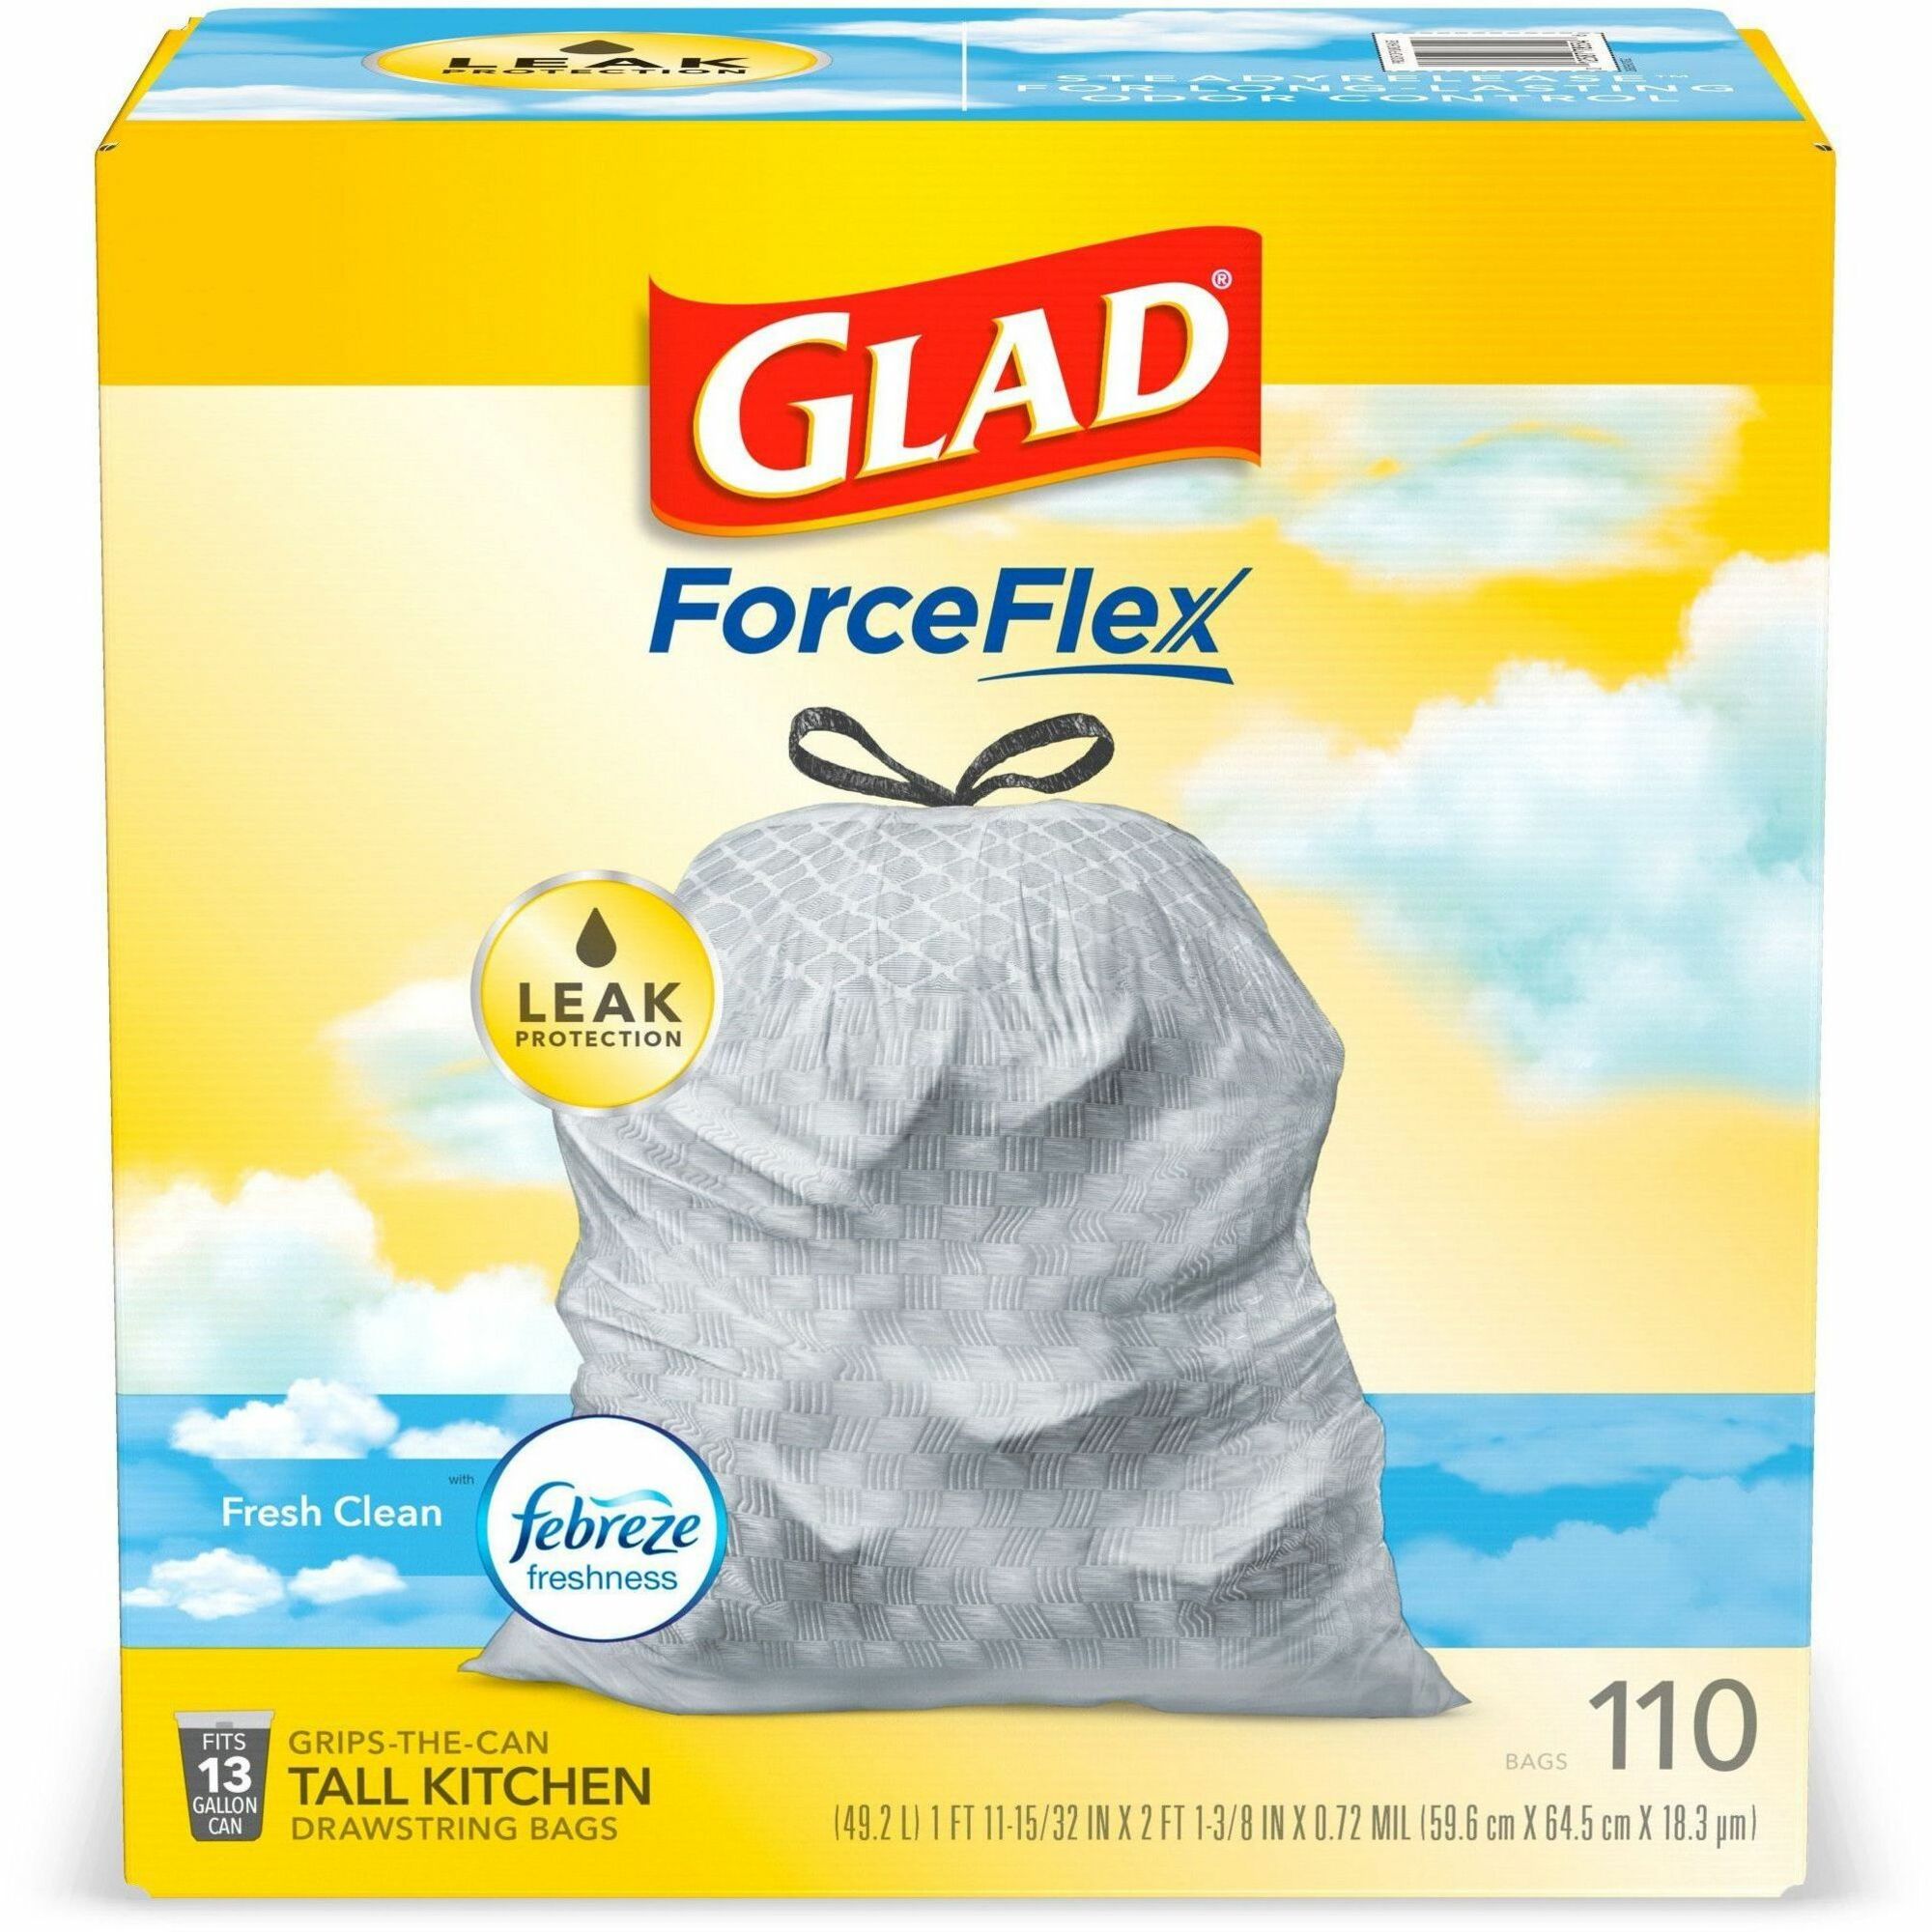 Glad ForceFlex Tall Kitchen Drawstring Trash Bags - Fresh Clean with Febreze Freshness - 13 gal Capacity - 23.75" Width x 25.38" Length - 0.72 mil (18 Micron) Thickness - Drawstring Closure - White - 1/Box - 110 Per Box - Home, Office - 1